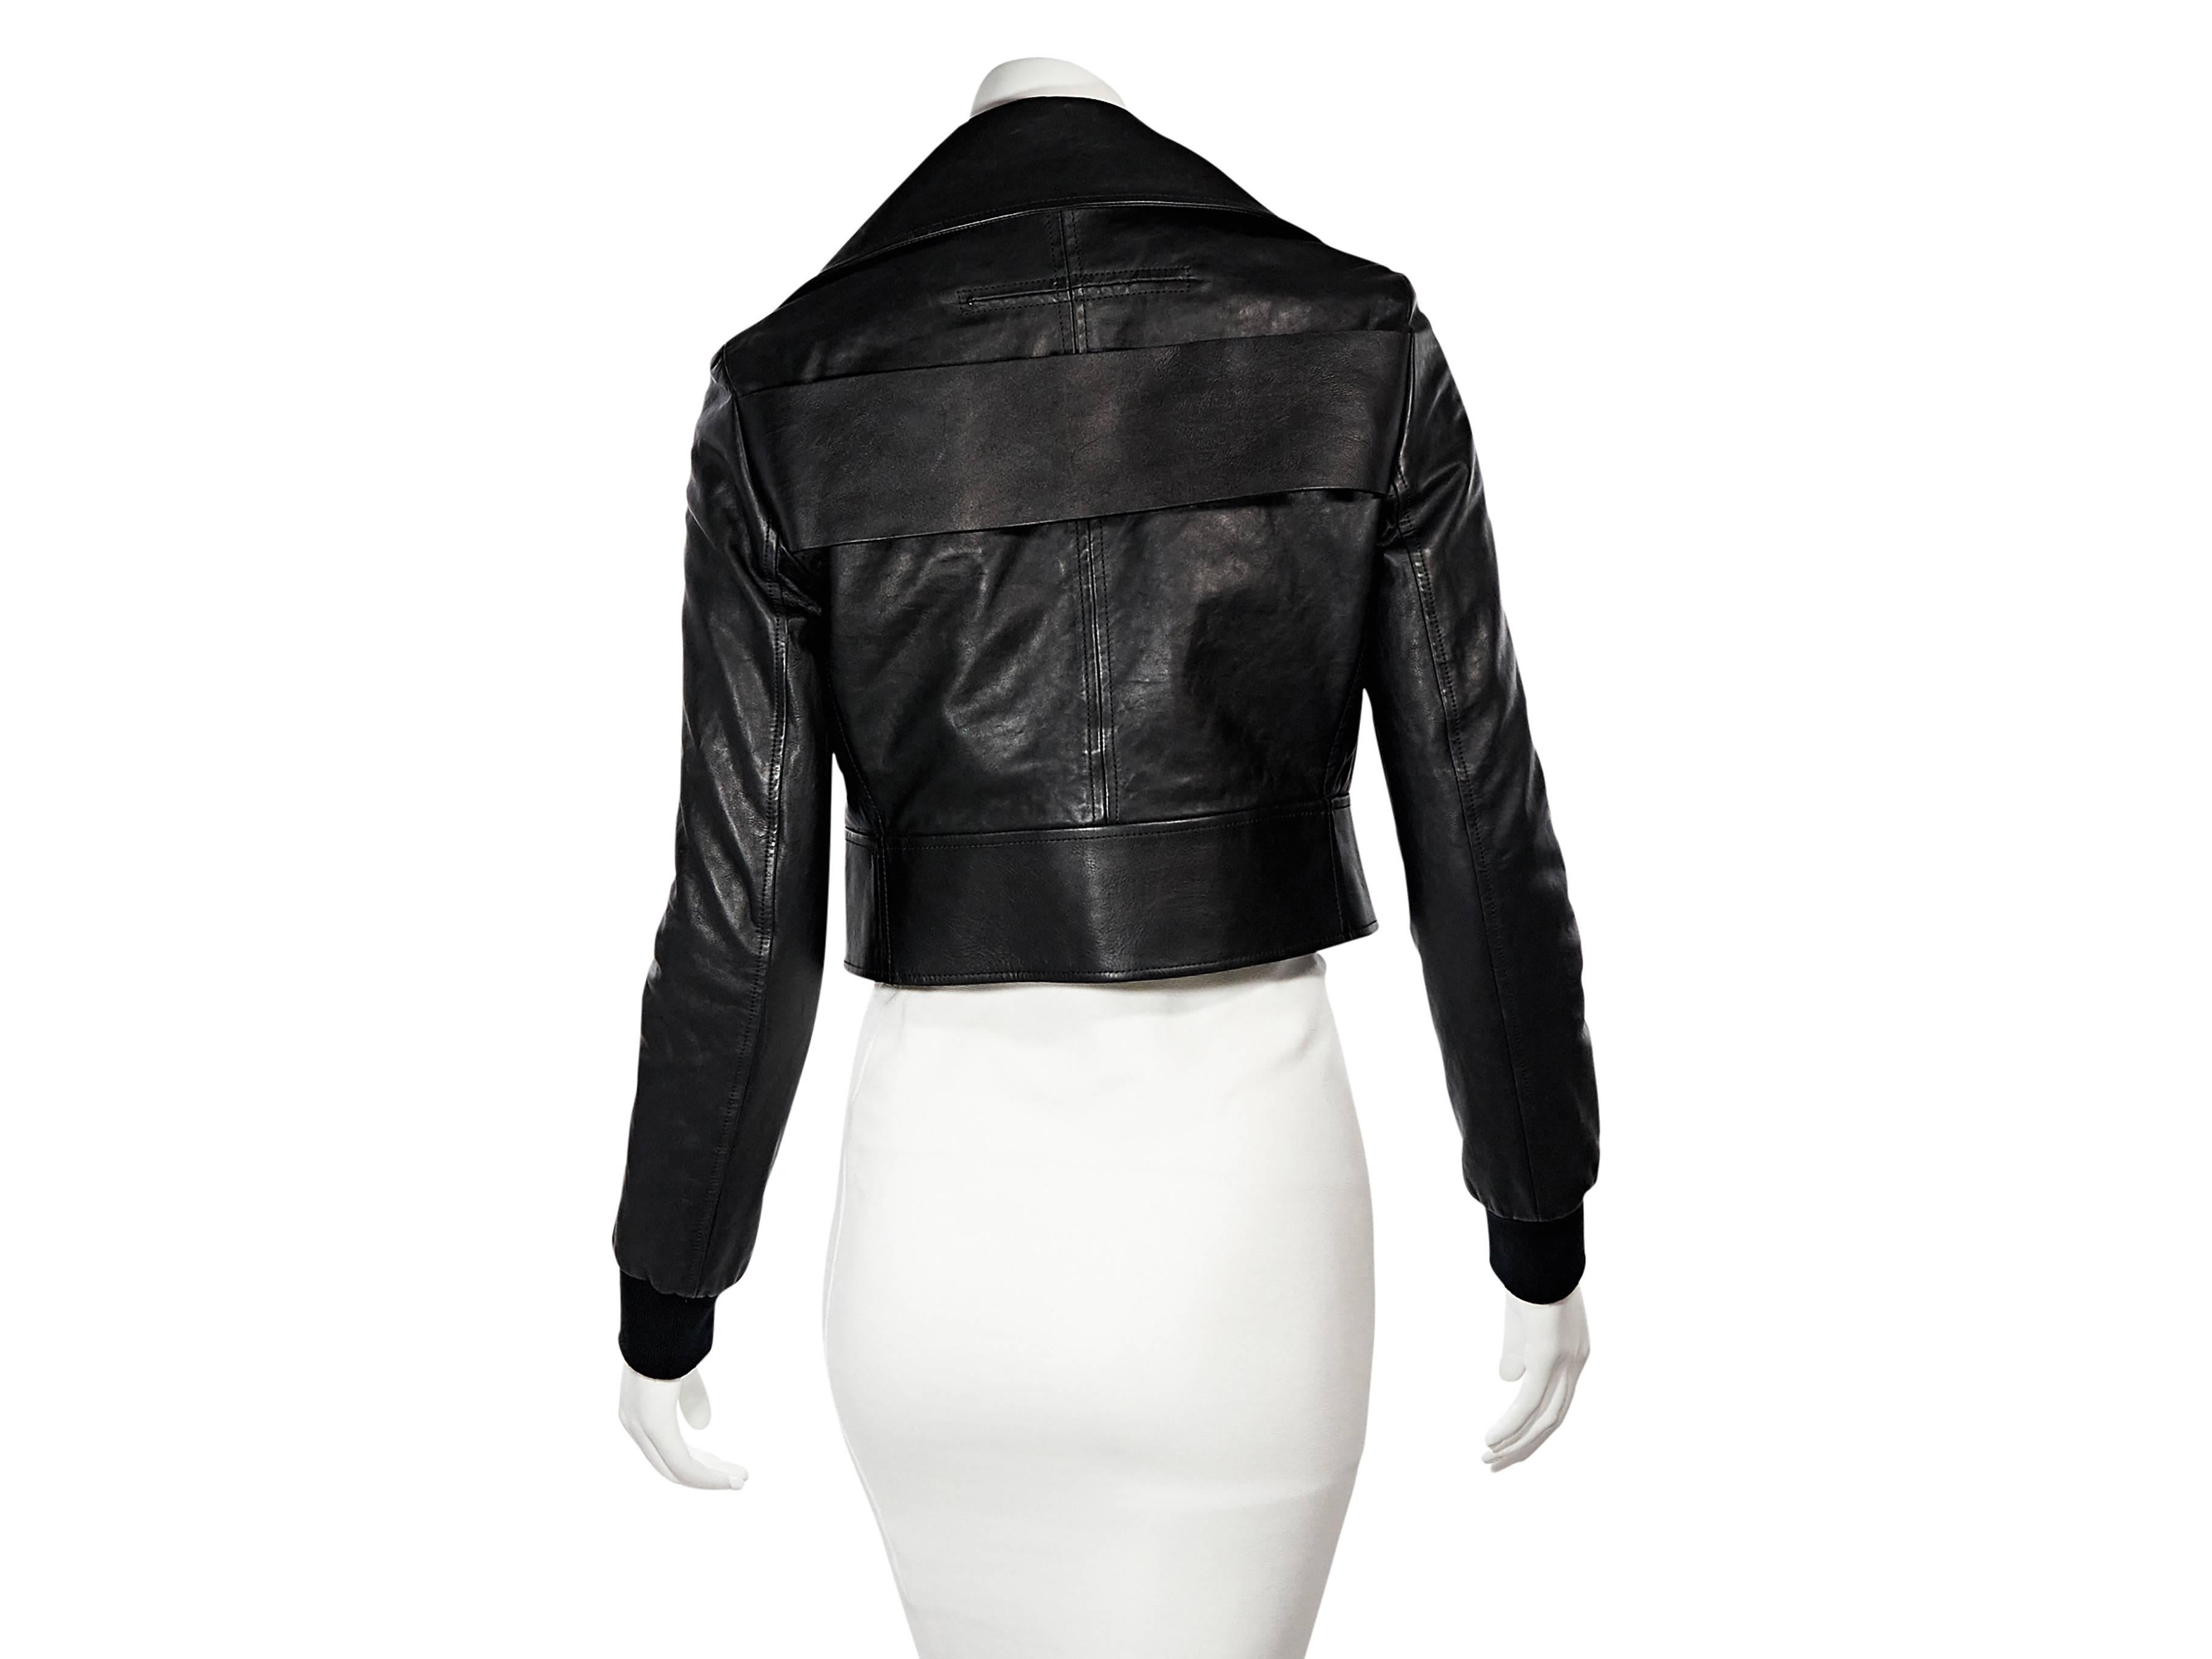 Product details: Black leather cropped jacket by Givenchy. Oversized notched lapel. Long sleeves. Ribbed cuffs. Asymmetrical zip-front closure. Snap flap pockets. Wide back strap accent. Banded hem with concealed snap closure. 
Condition: Very good.